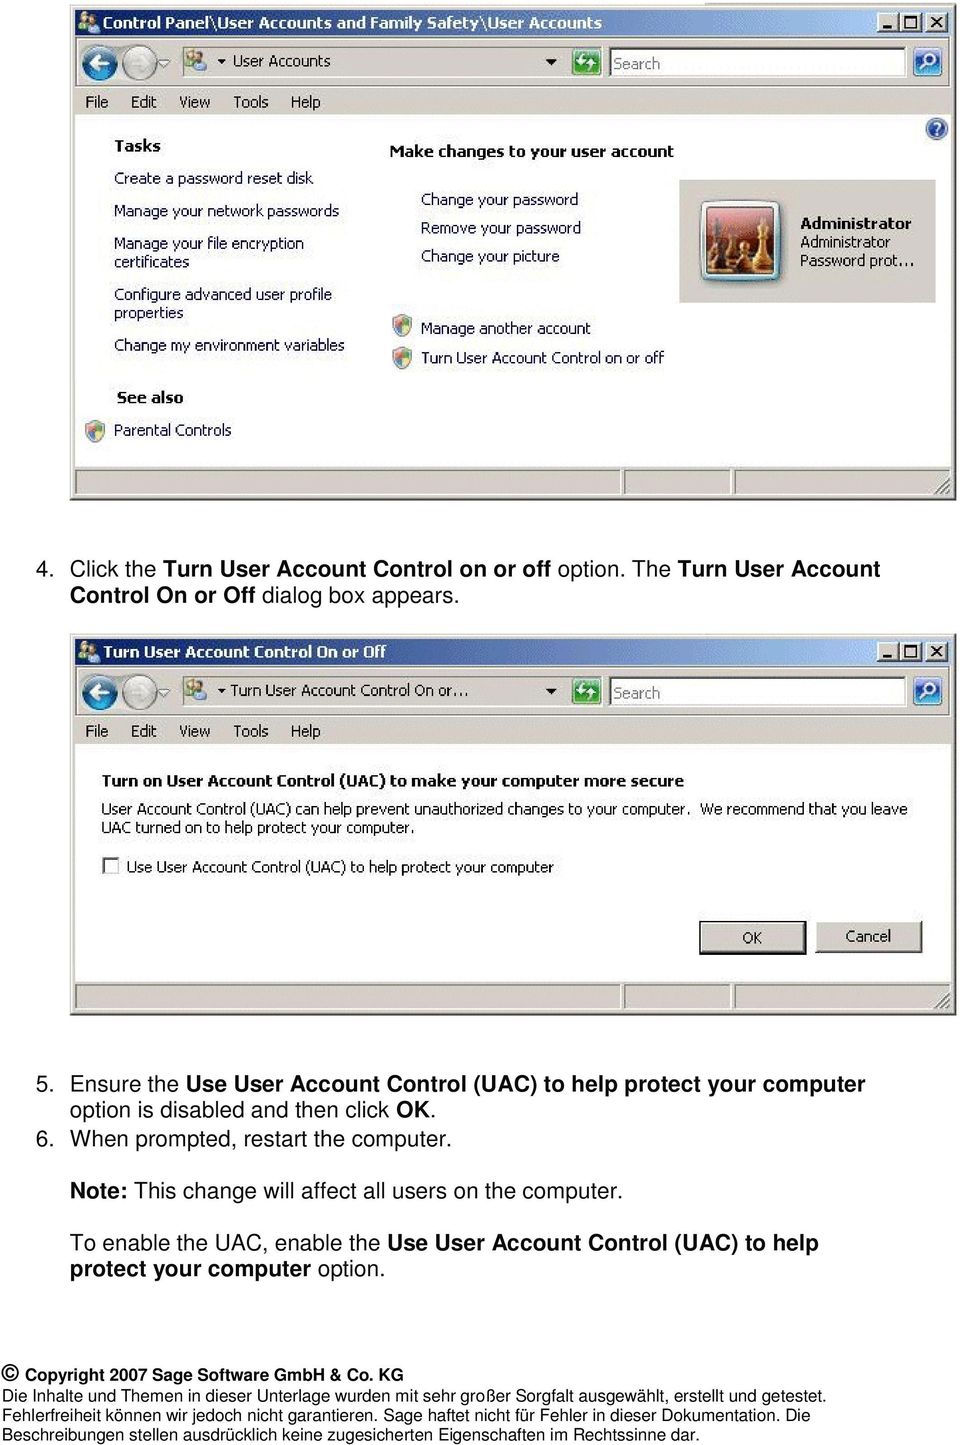 Ensure the Use User Account Control (UAC) to help protect your computer option is disabled and then